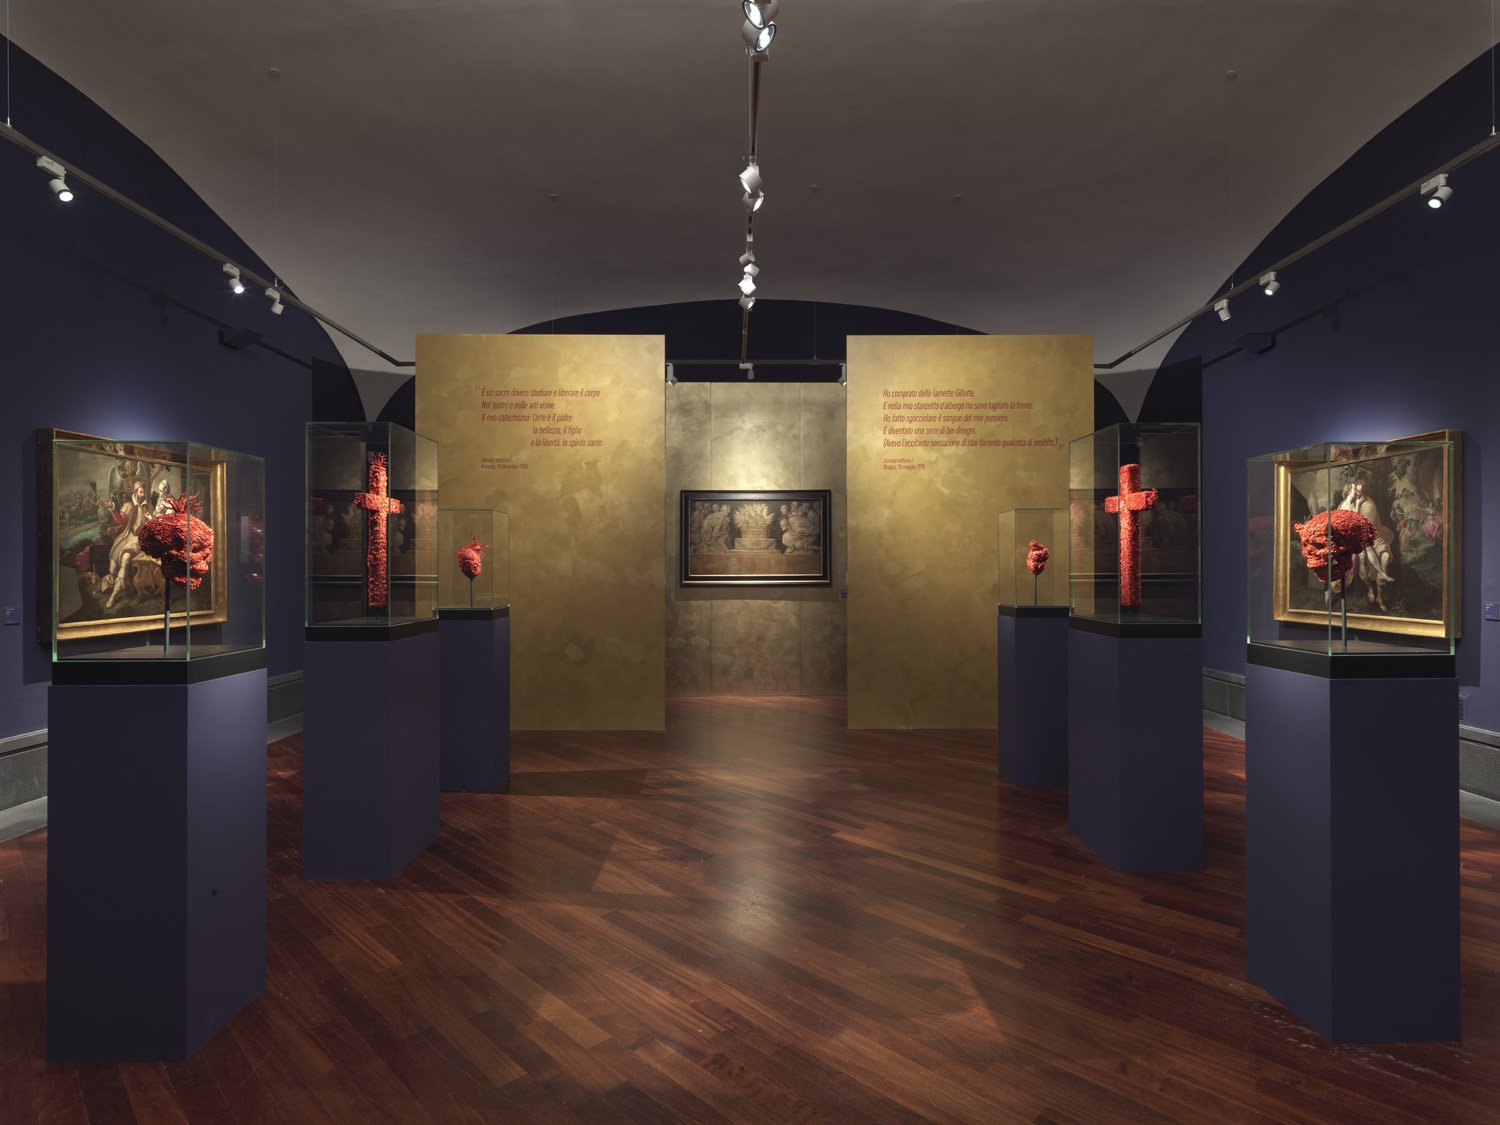 1. Jan Fabre, Golden and Coral Sculptures, Blood Drawings, 30 March - 15 September 2019, installation view at Museo e Real Bosco di Capodimonte, Naples.jpg